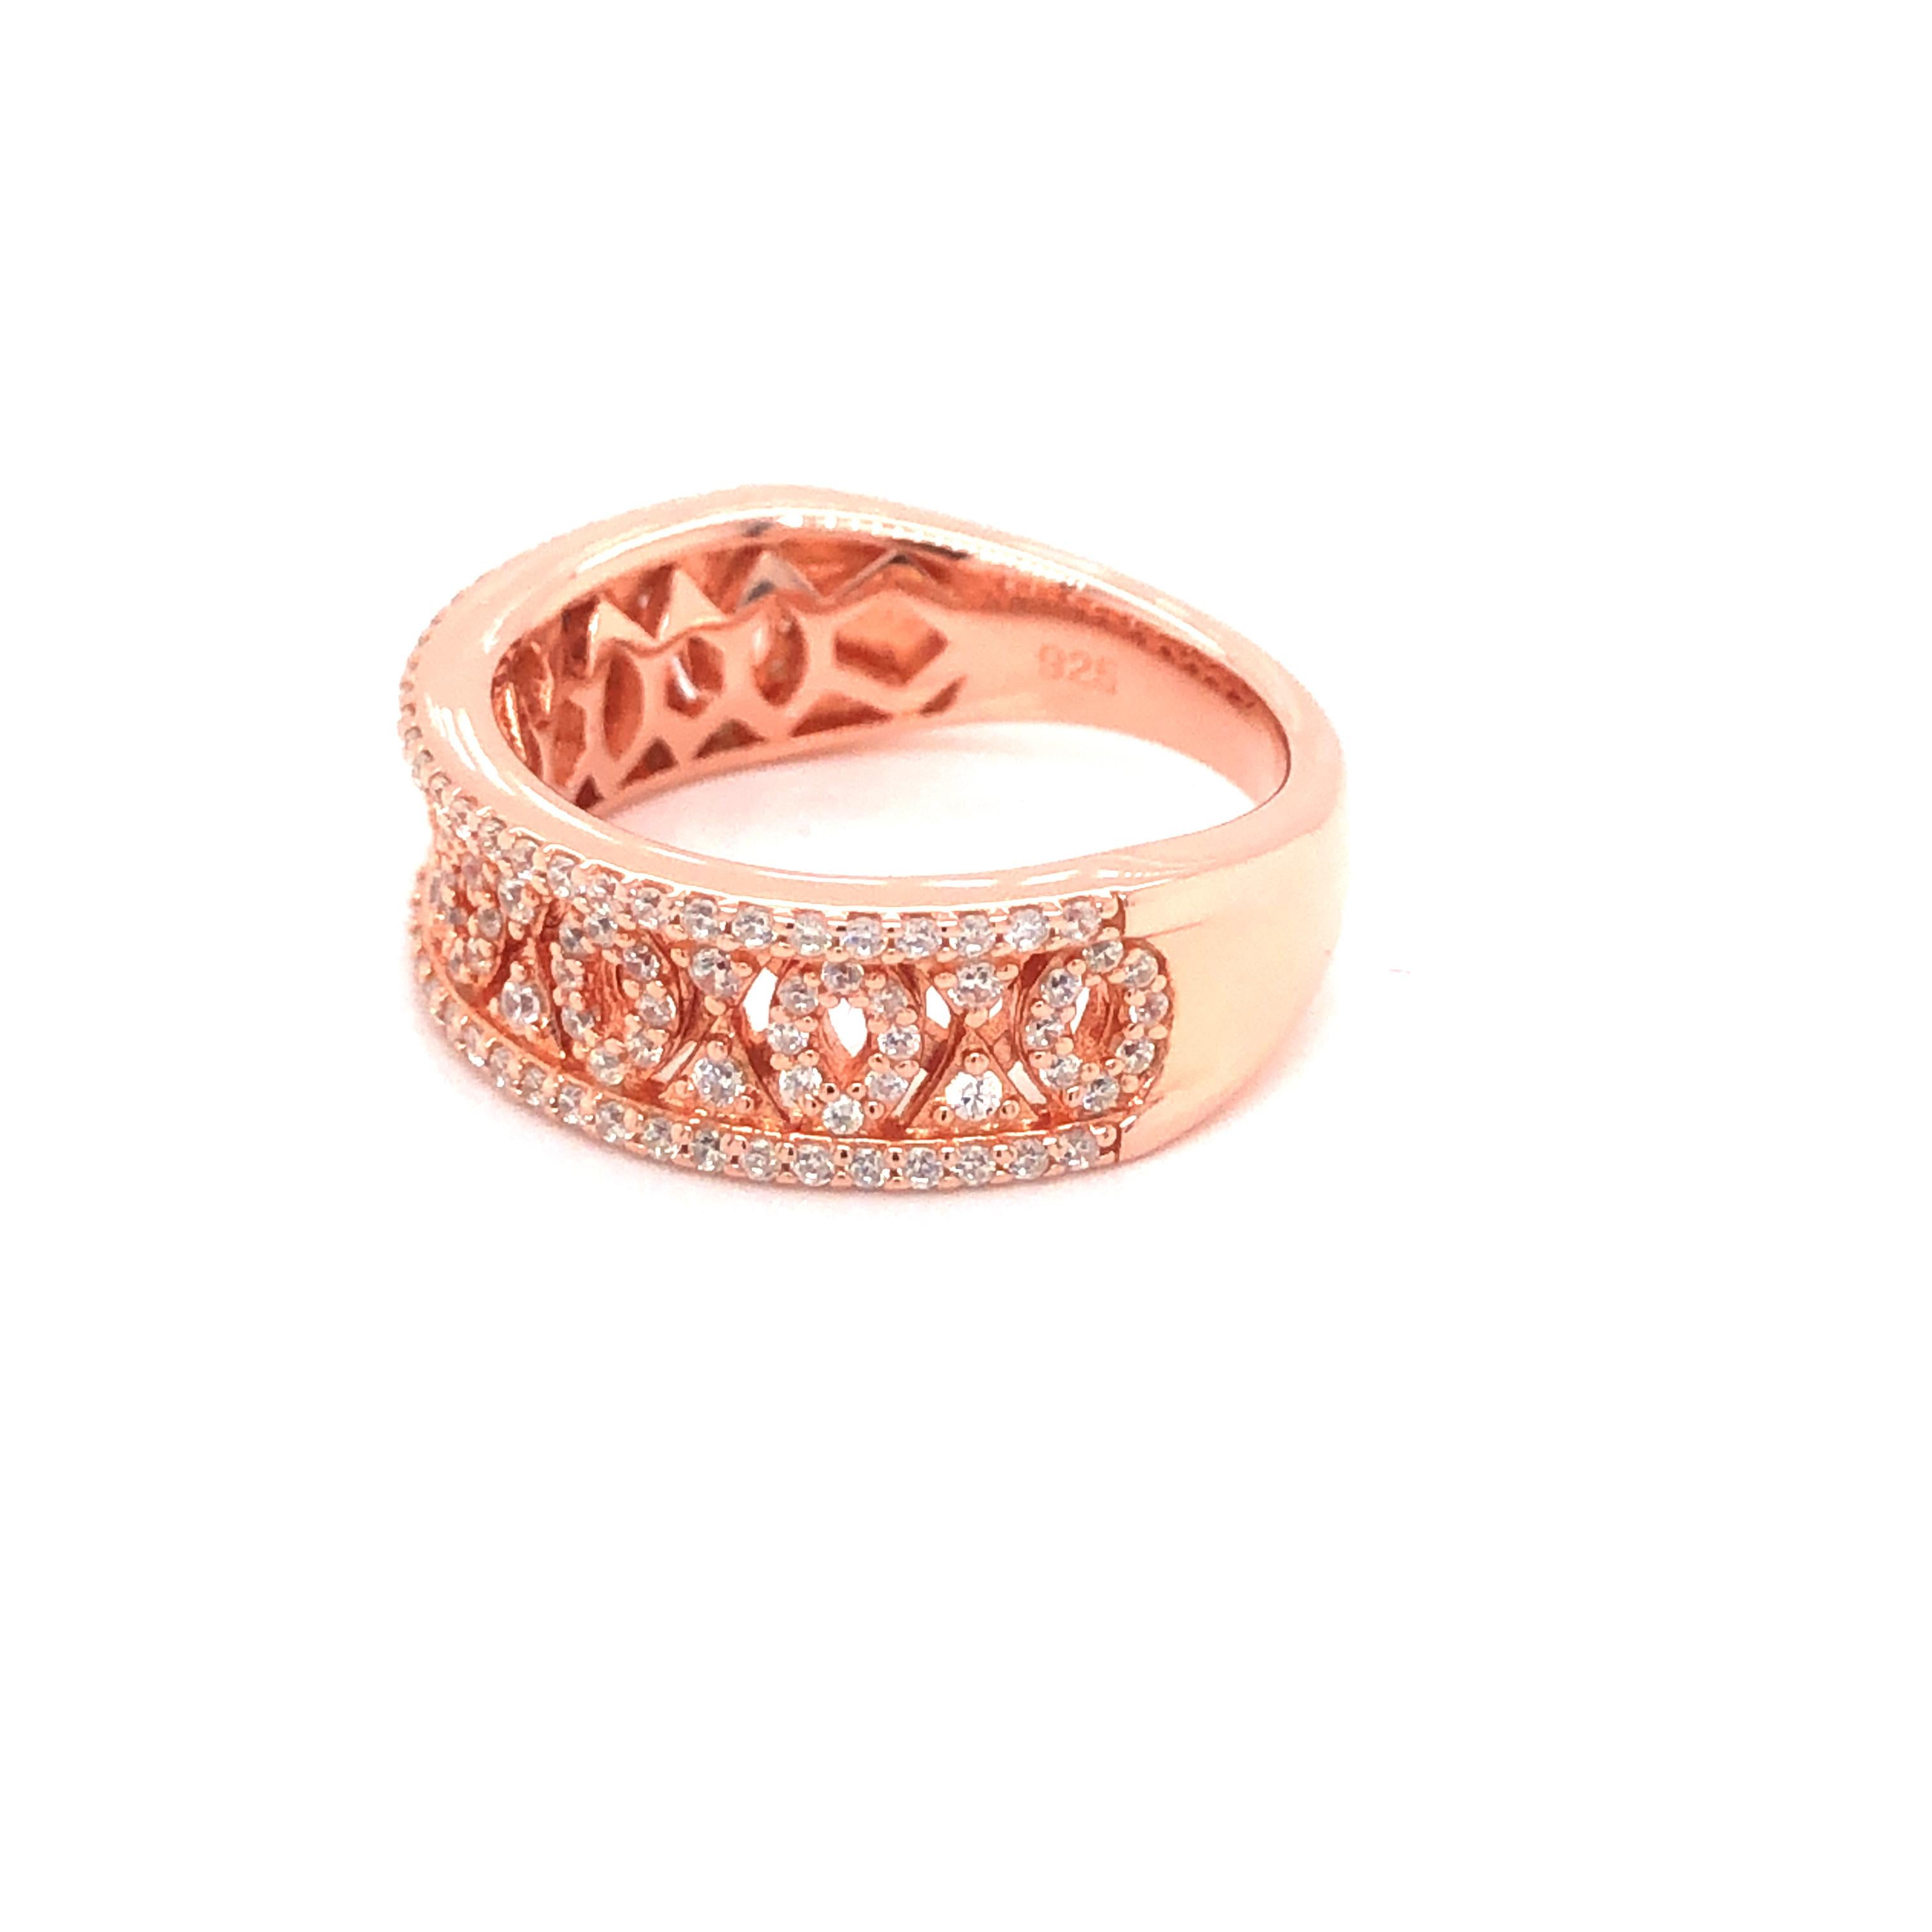 Women's 1.07 Carat Cubic Zirconia Rose Gold Plated Half Filigree Wedding Band Ring For Sale